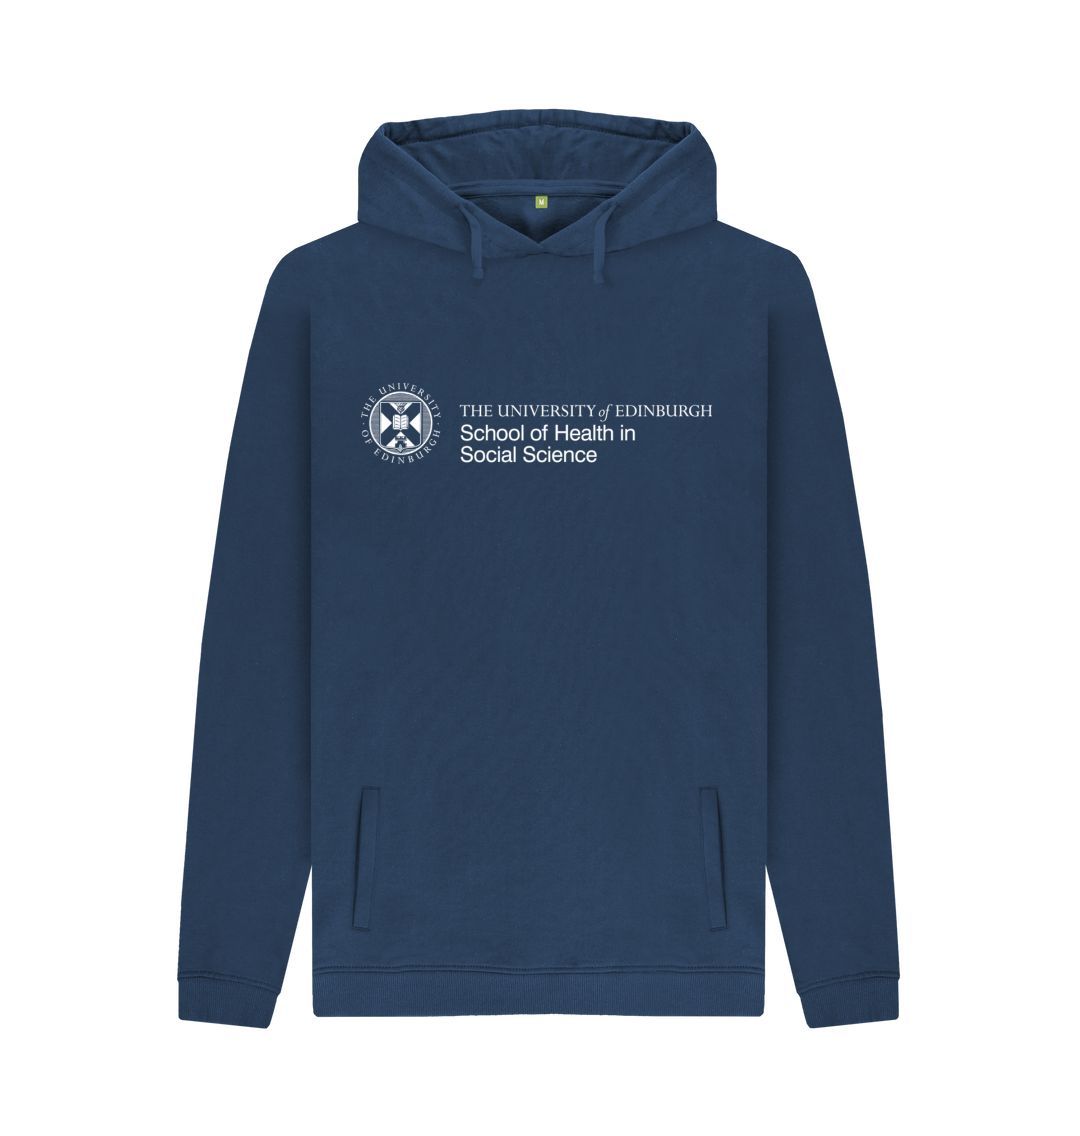 Navy hoodie with white University crest and text that reads ' University of Edinburgh School of Health in Social Science